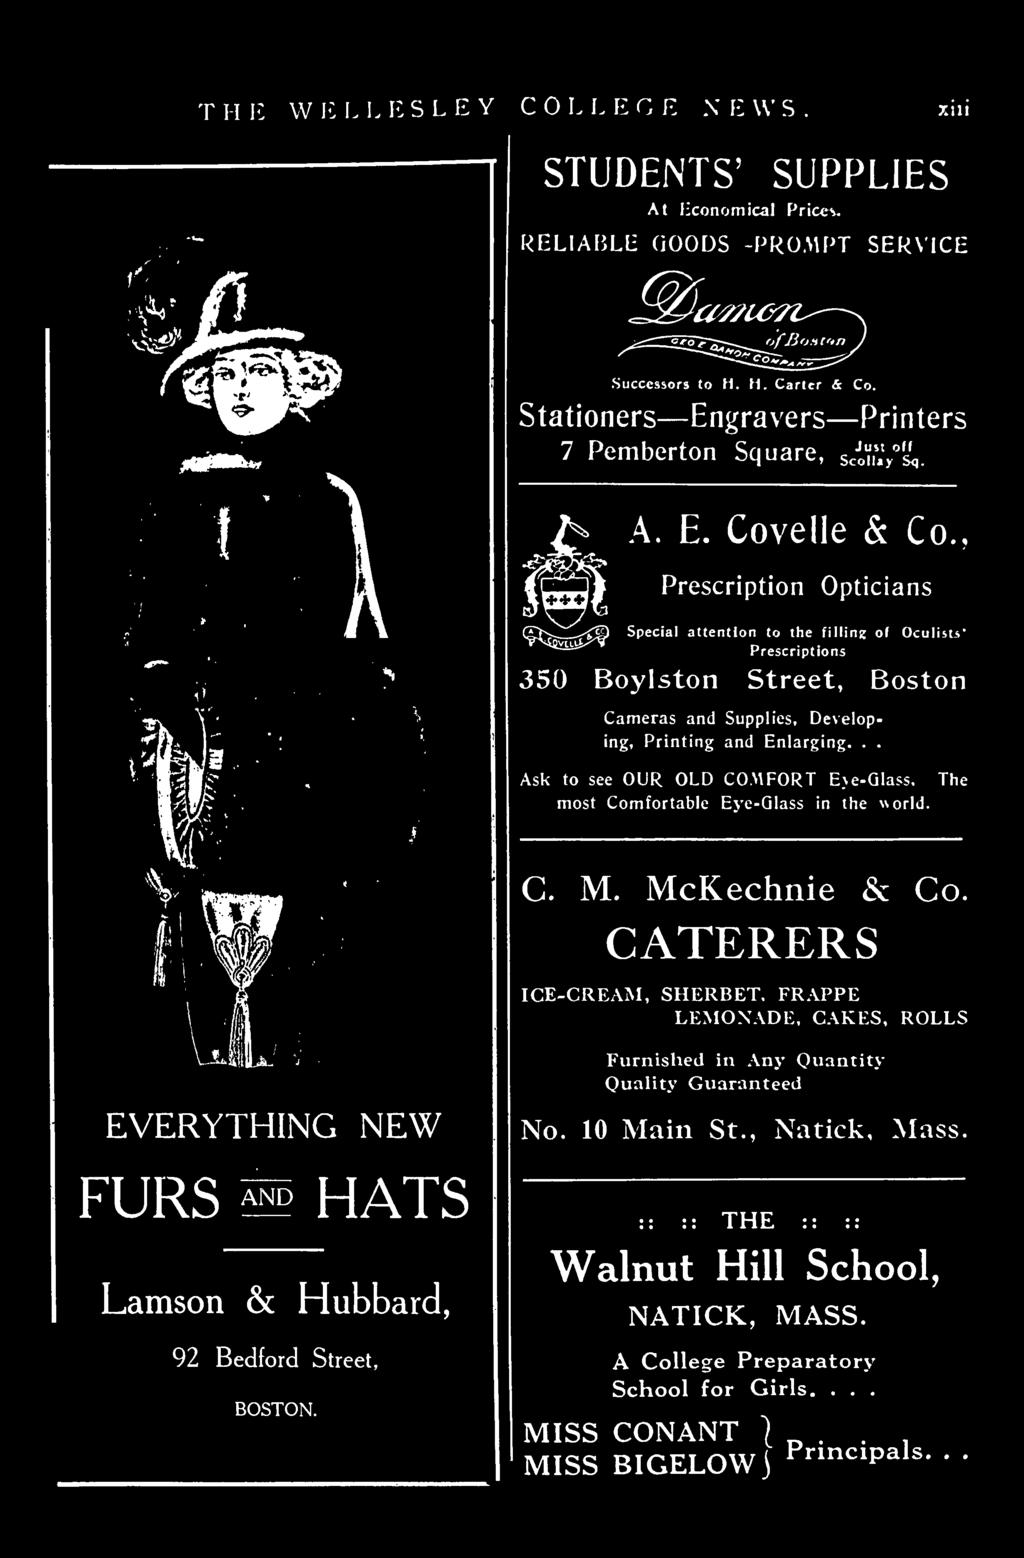 3 EVERYTHING NEW FURS ^p HATS Lamson & Hubbard, 92 Bedford Street, BOSTON. C. M. McKechne & Co. CATERERS ICE-CREAM, SHERBET.